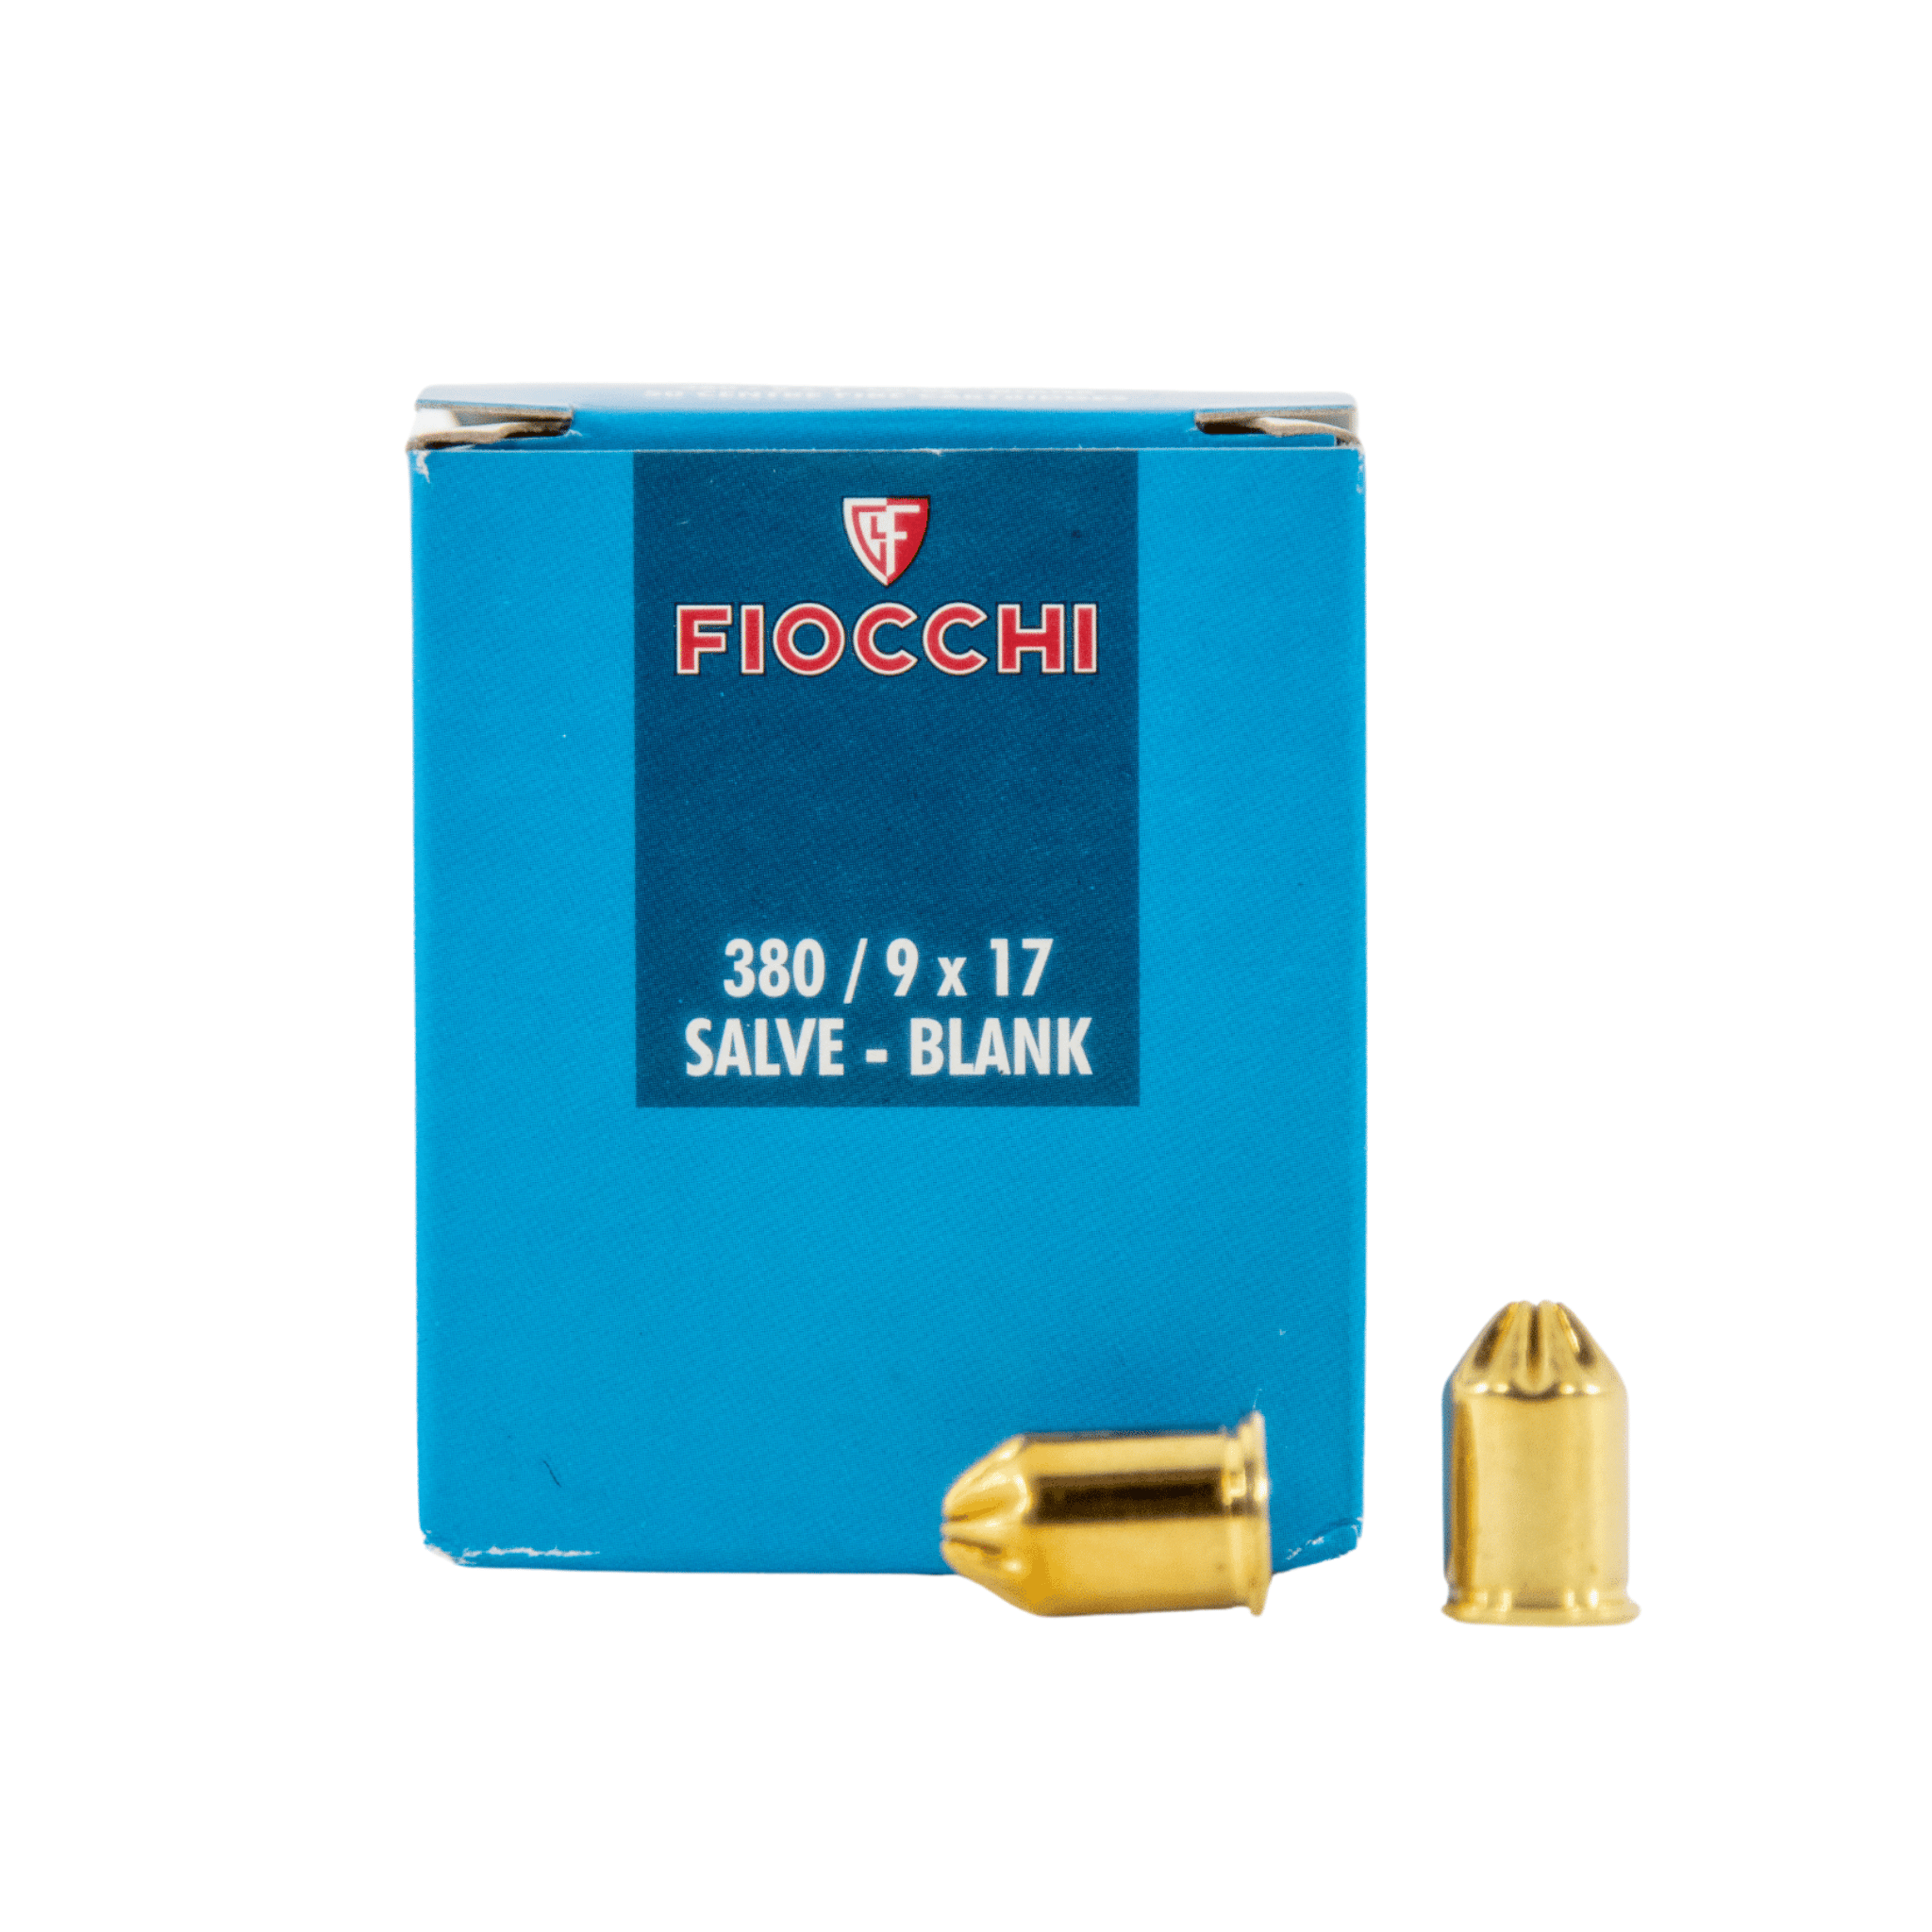 cardboard box of 50 FIOCCHI blank ammunition rounds for starting pistols 0.38 9mm